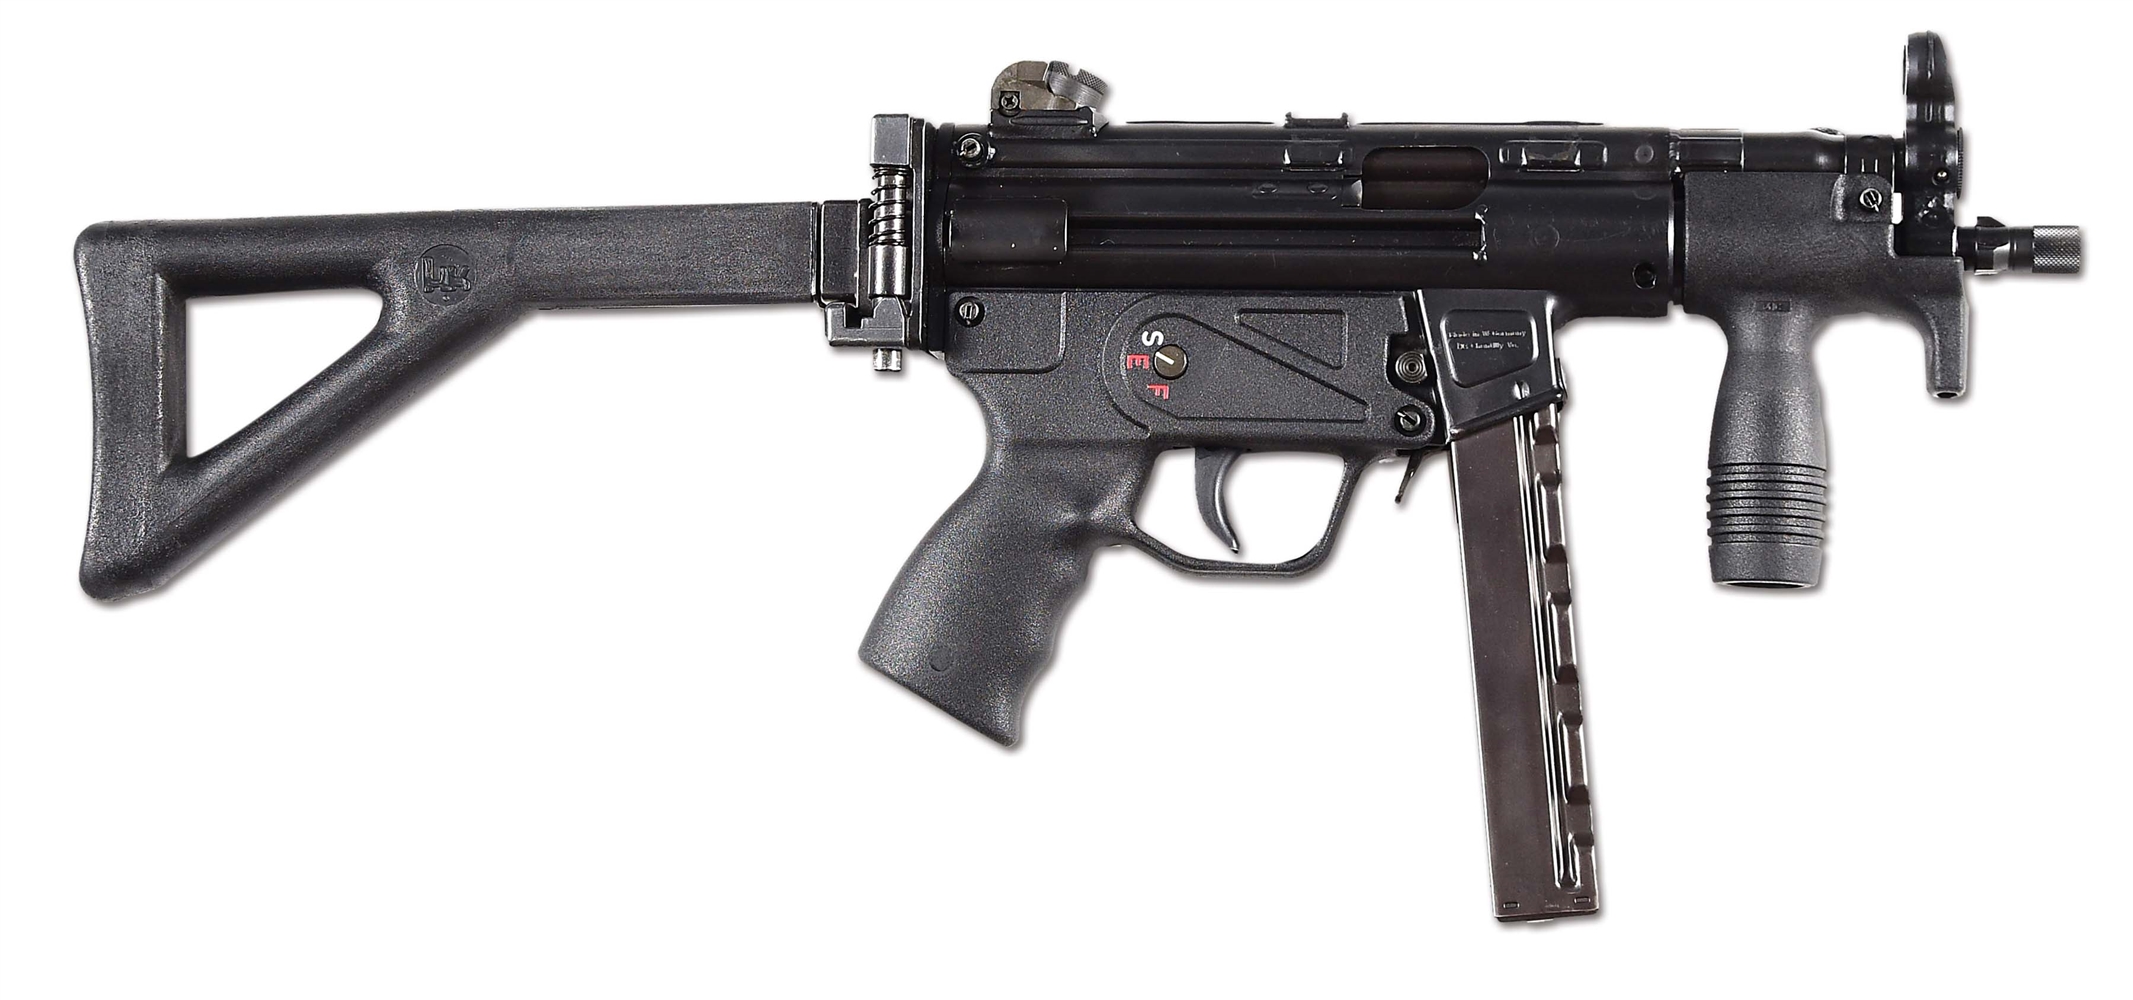 (N) VERY DESIRABLE S & H ARMS REGISTERED RECEIVER HK 94 CONVERTED TO MP5K FOLDING STOCK MACHINE GUN (FULLY TRANSFERABLE).